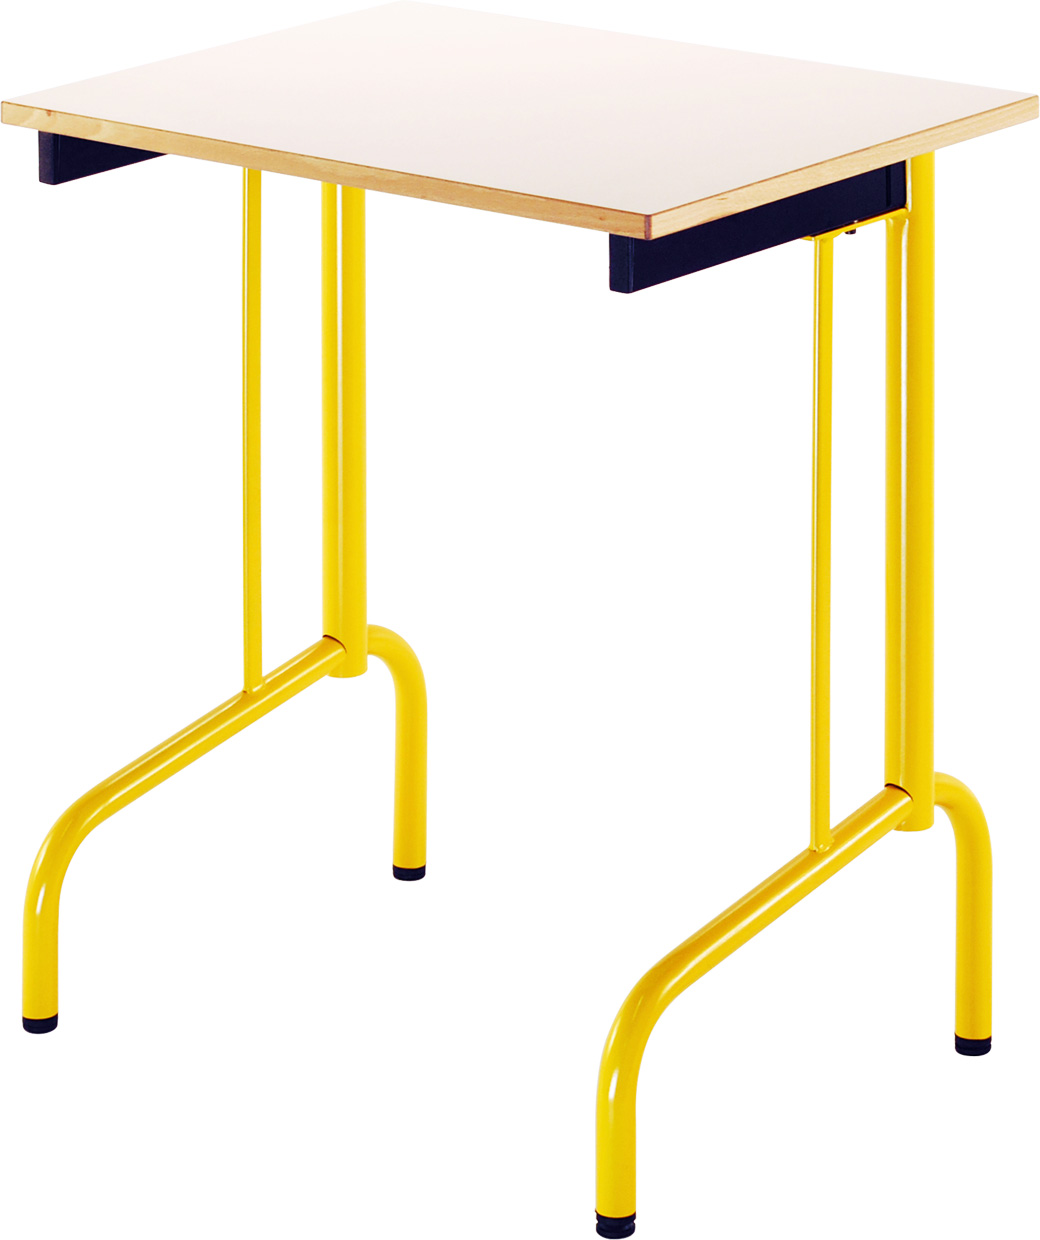 Table scolaire fixe TOALENN